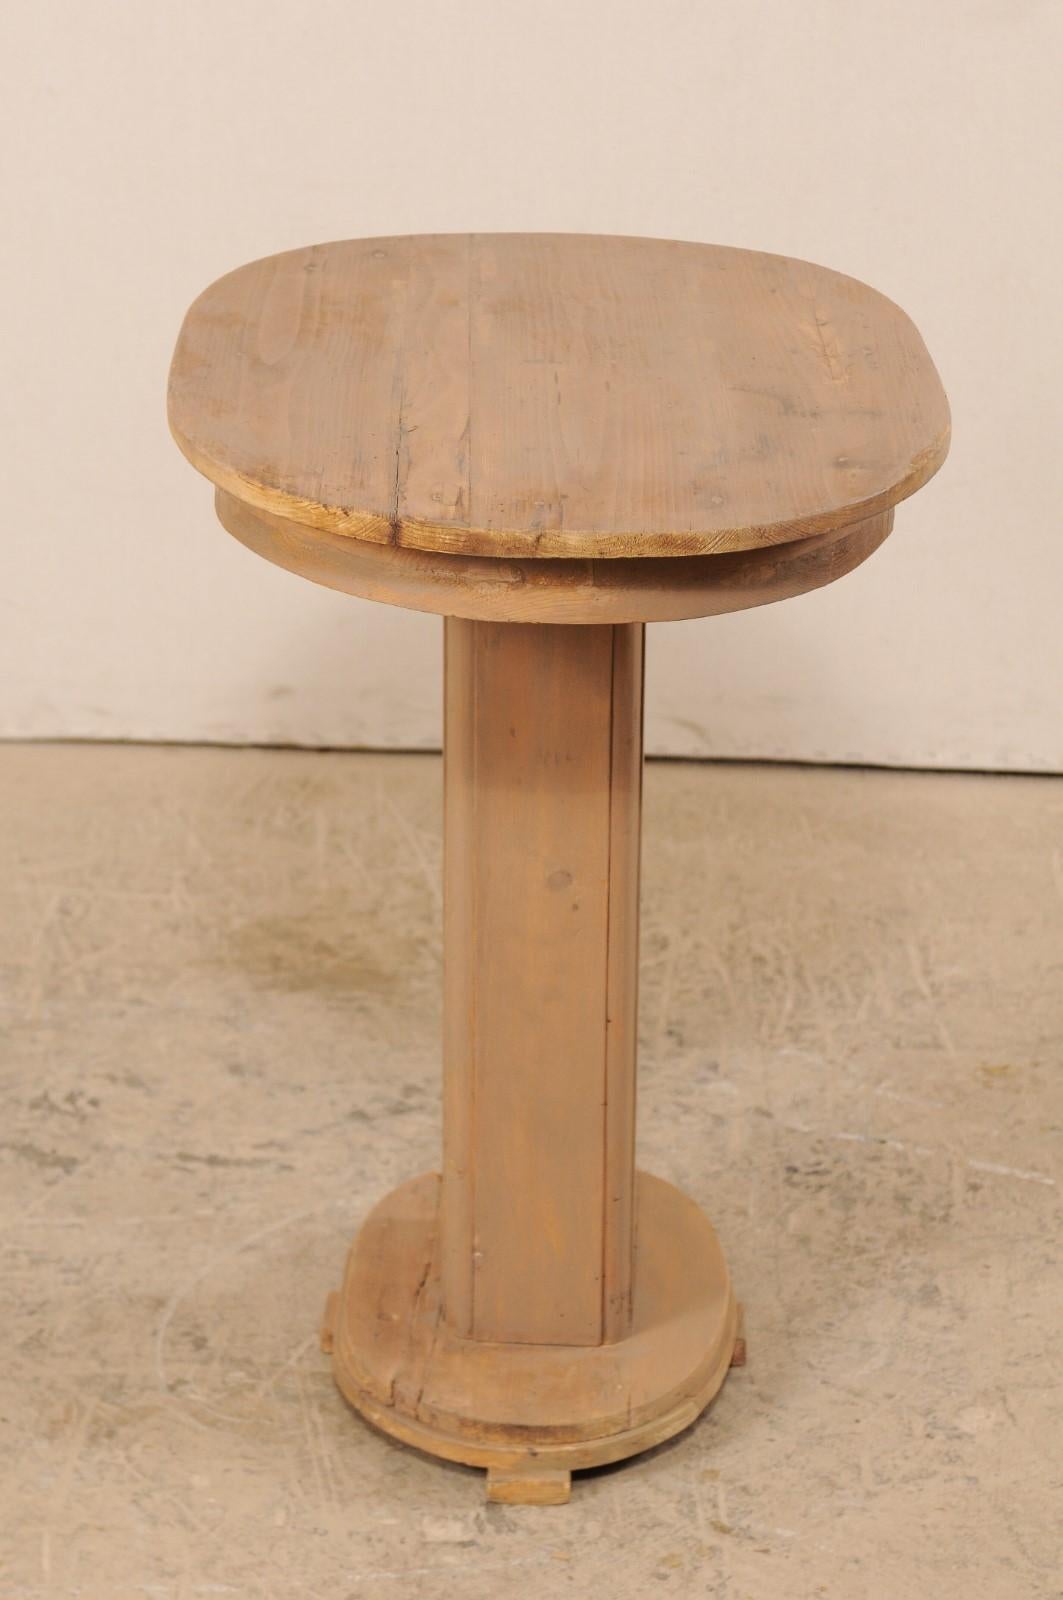 French Mid-20th Century Painted Wood Oval Top Pedestal Table For Sale 4